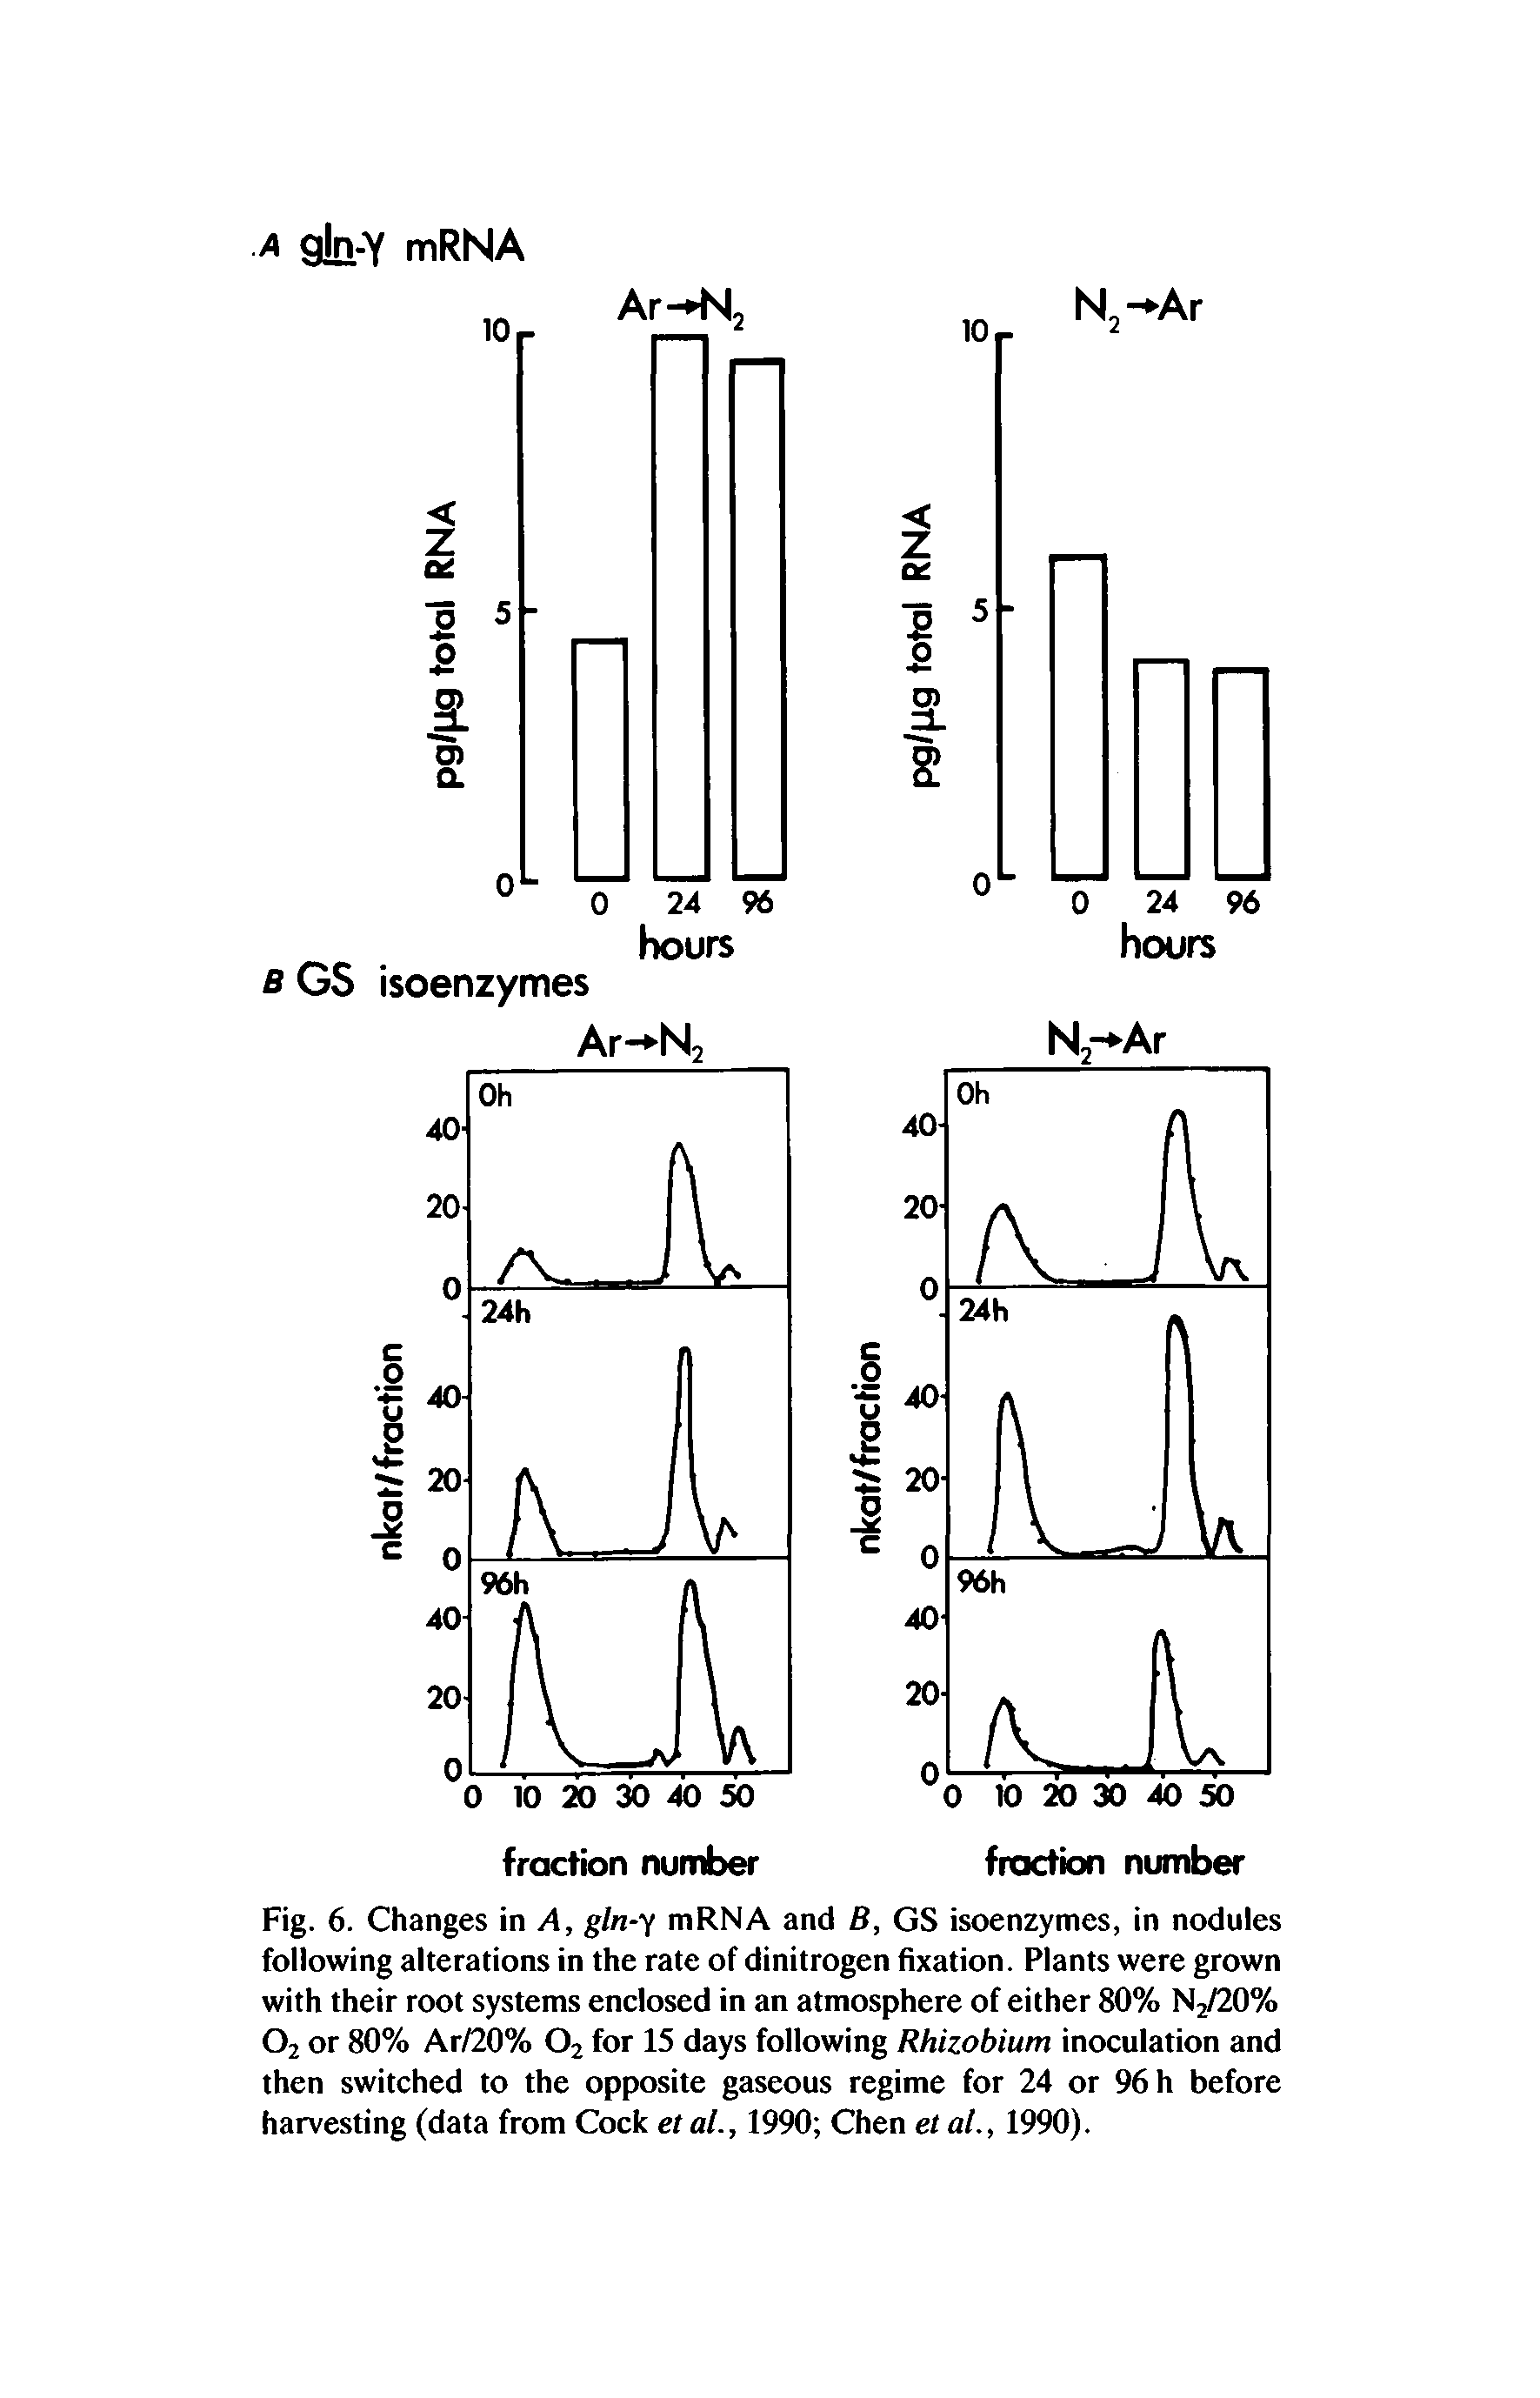 Fig. 6. Changes in A, gln-y mRNA and B, GS isoenzymes, in nodules following alterations in the rate of dinitrogen fixation. Plants were grown with their root systems enclosed in an atmosphere of either 80% N2/20% Oz or 80% Ar/20% 02 for 15 days following Rhizobium inoculation and then switched to the opposite gaseous regime for 24 or 96 h before harvesting (data from Cock et al., 1990 Chen et at., 1990).